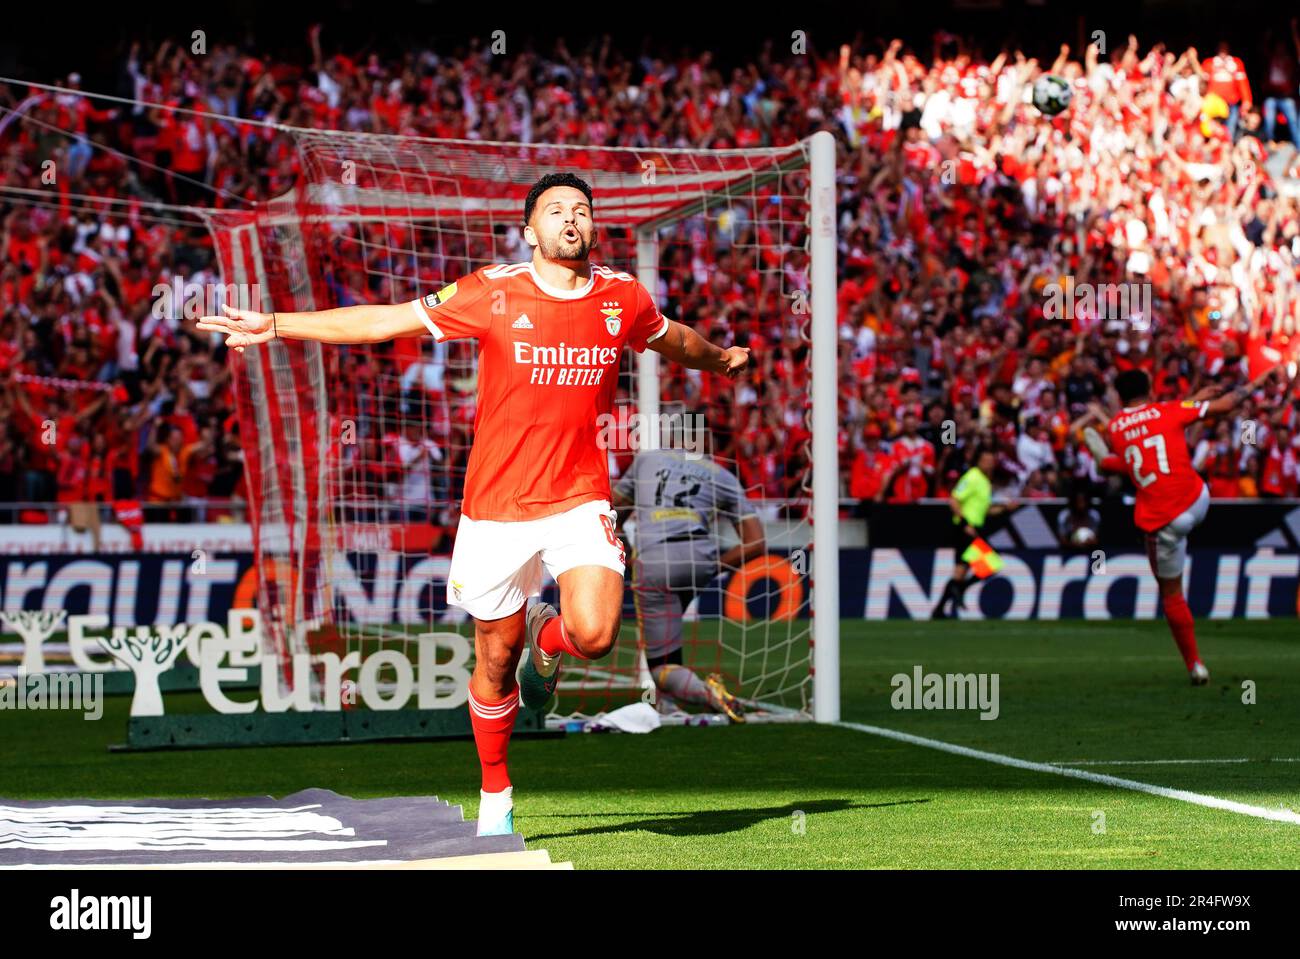 Lisbon, Portugal. 27th May, 2023. Goncalo Ramos of Benfica celebrates scoring a goal during the Portuguese League football match between SL Benfica and Santa Clara in Lisbon, Portugal, May 27, 2023. Credit: Pedro Fiuza/Xinhua/Alamy Live News Stock Photo